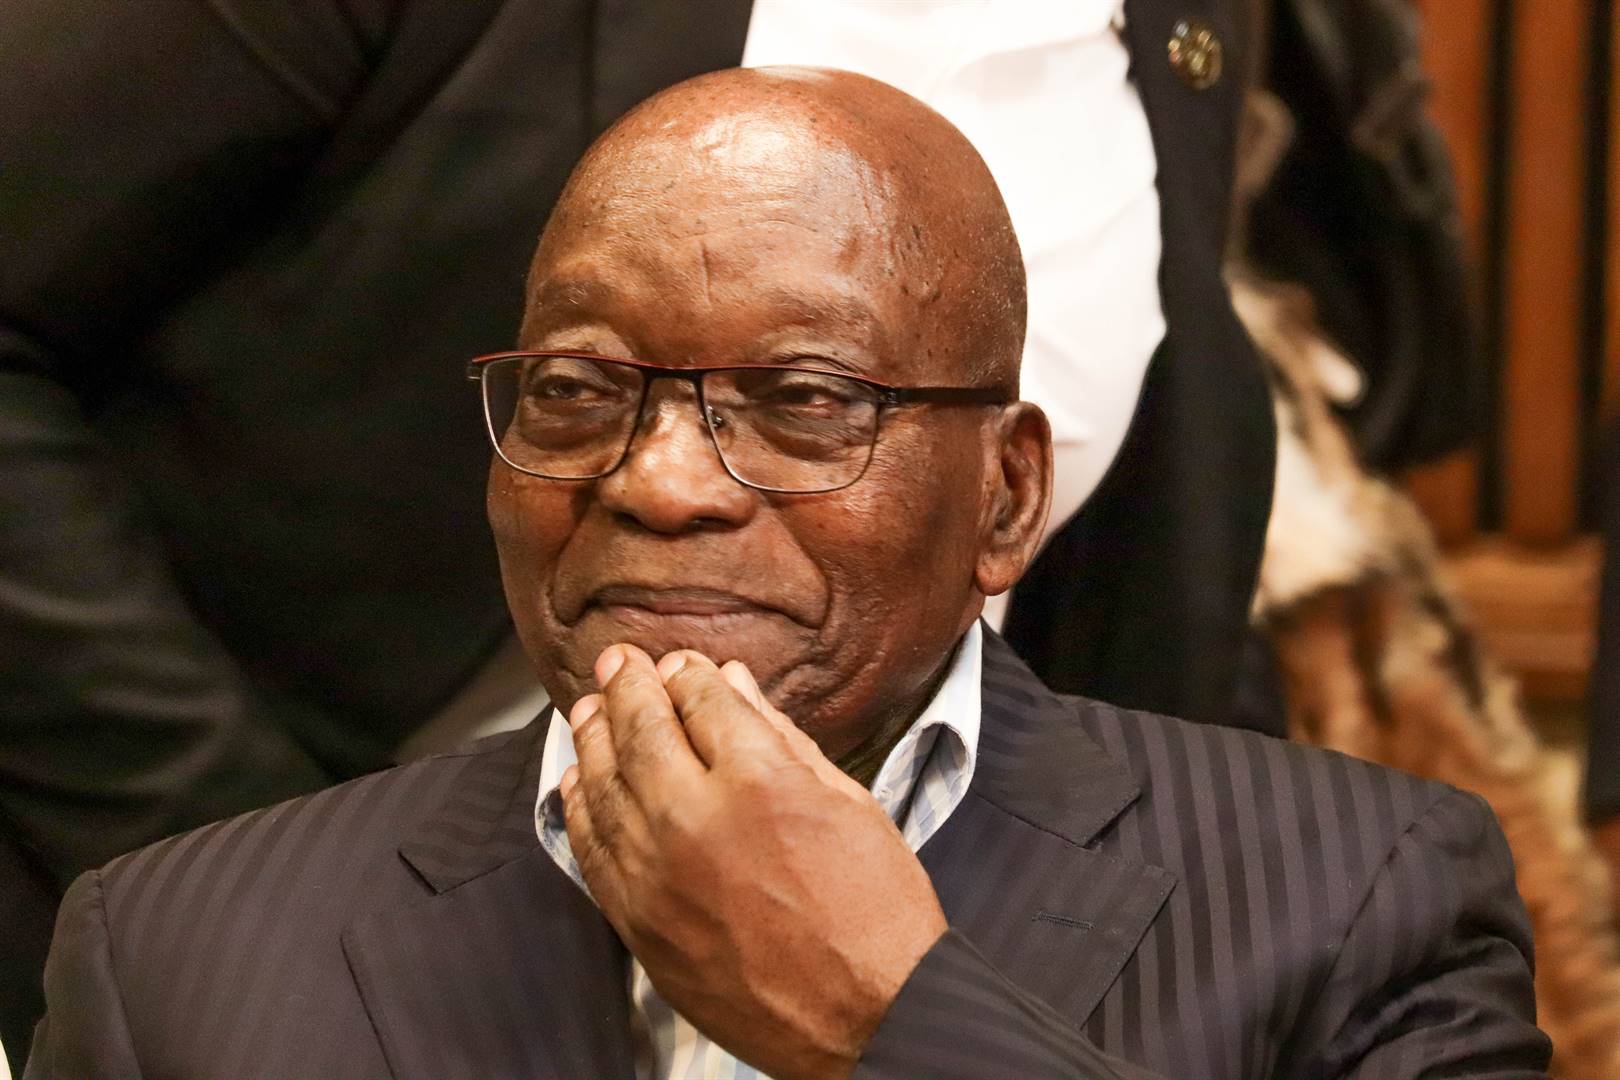 'In 2024 I will vote for MK party': Former ANC president Jacob Zuma ...